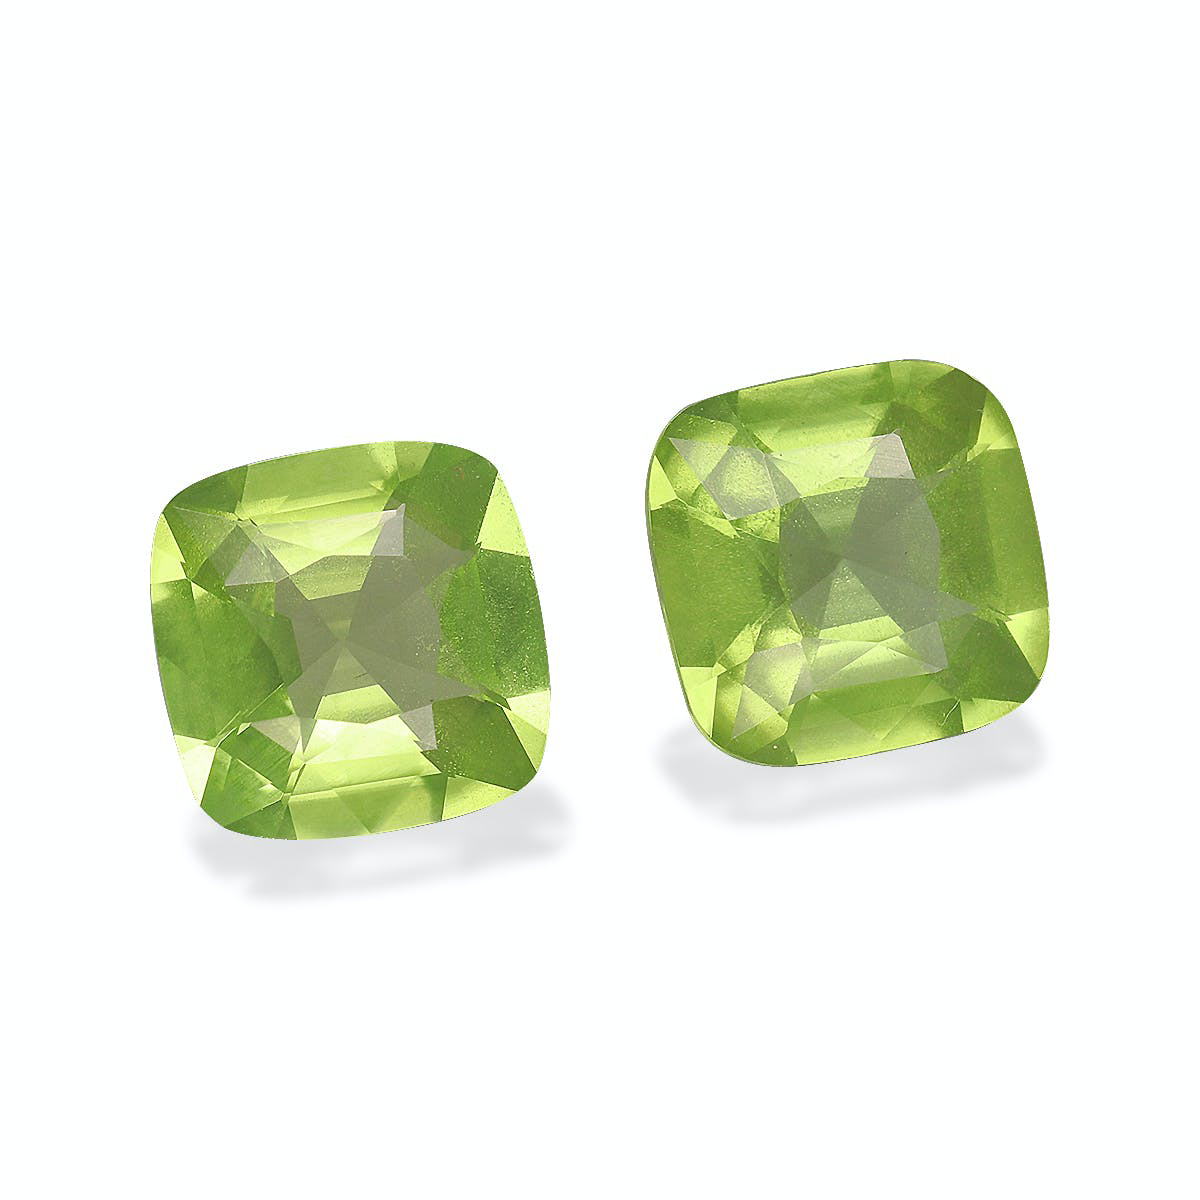 Picture of Lime Green Peridot 4.22ct - 8mm Pair (PD0120)